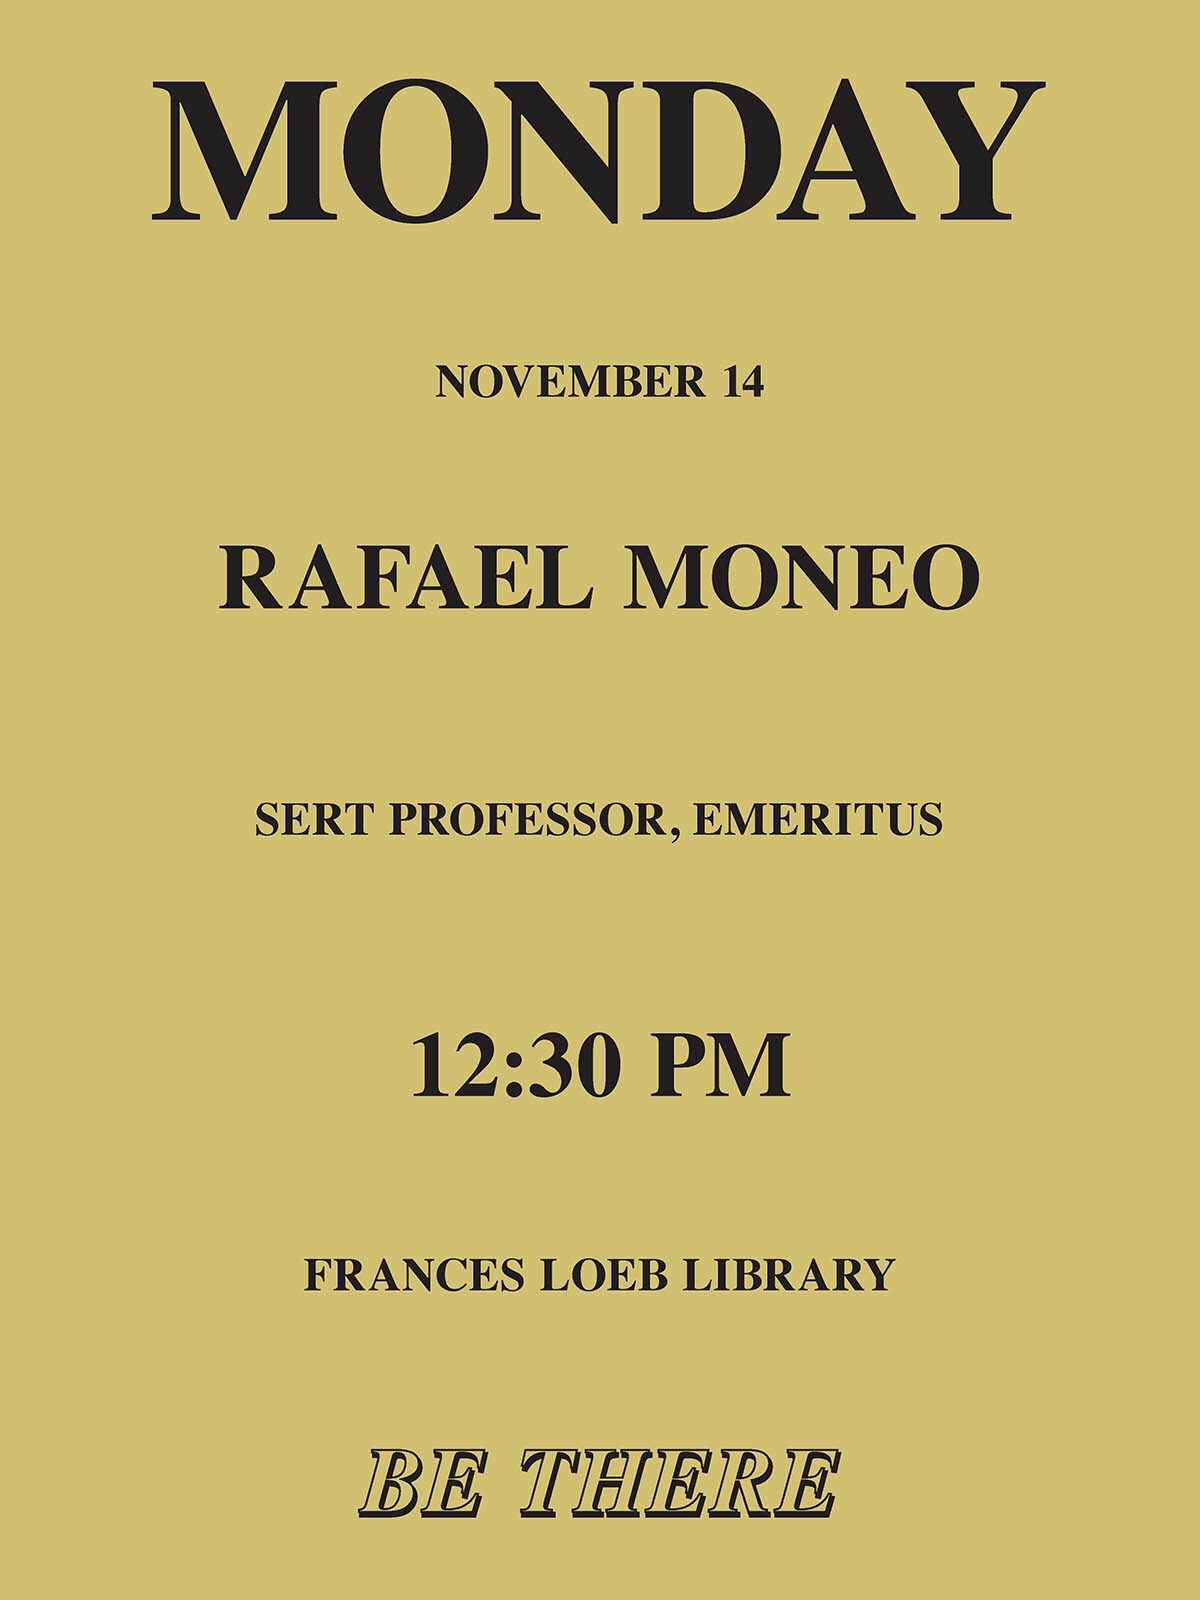 Pale yellow poster with black text advertising the event with Rafael Moneo.